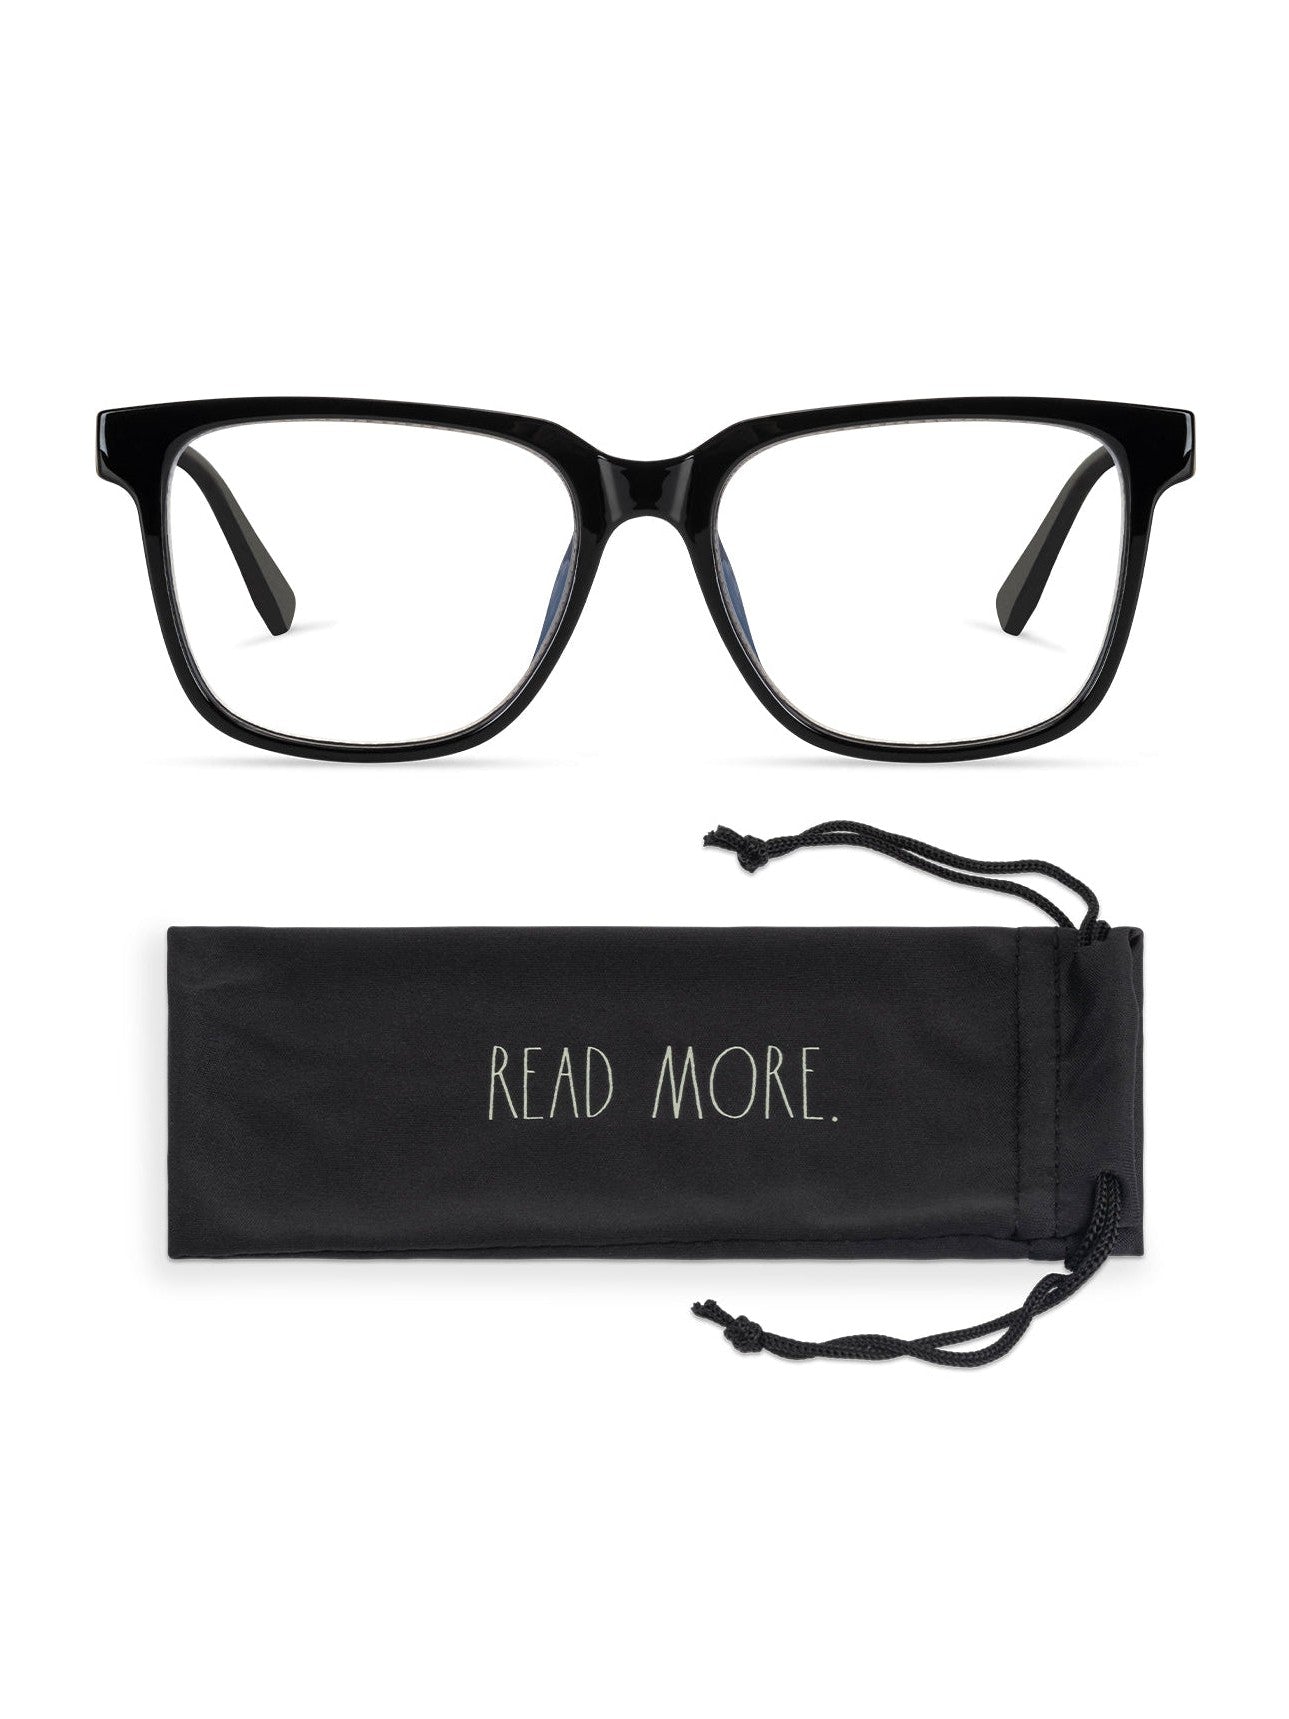 VELMA Blue Light Blocking Reading Glasses with READ MORE Signature Font - Rae Dunn Wear